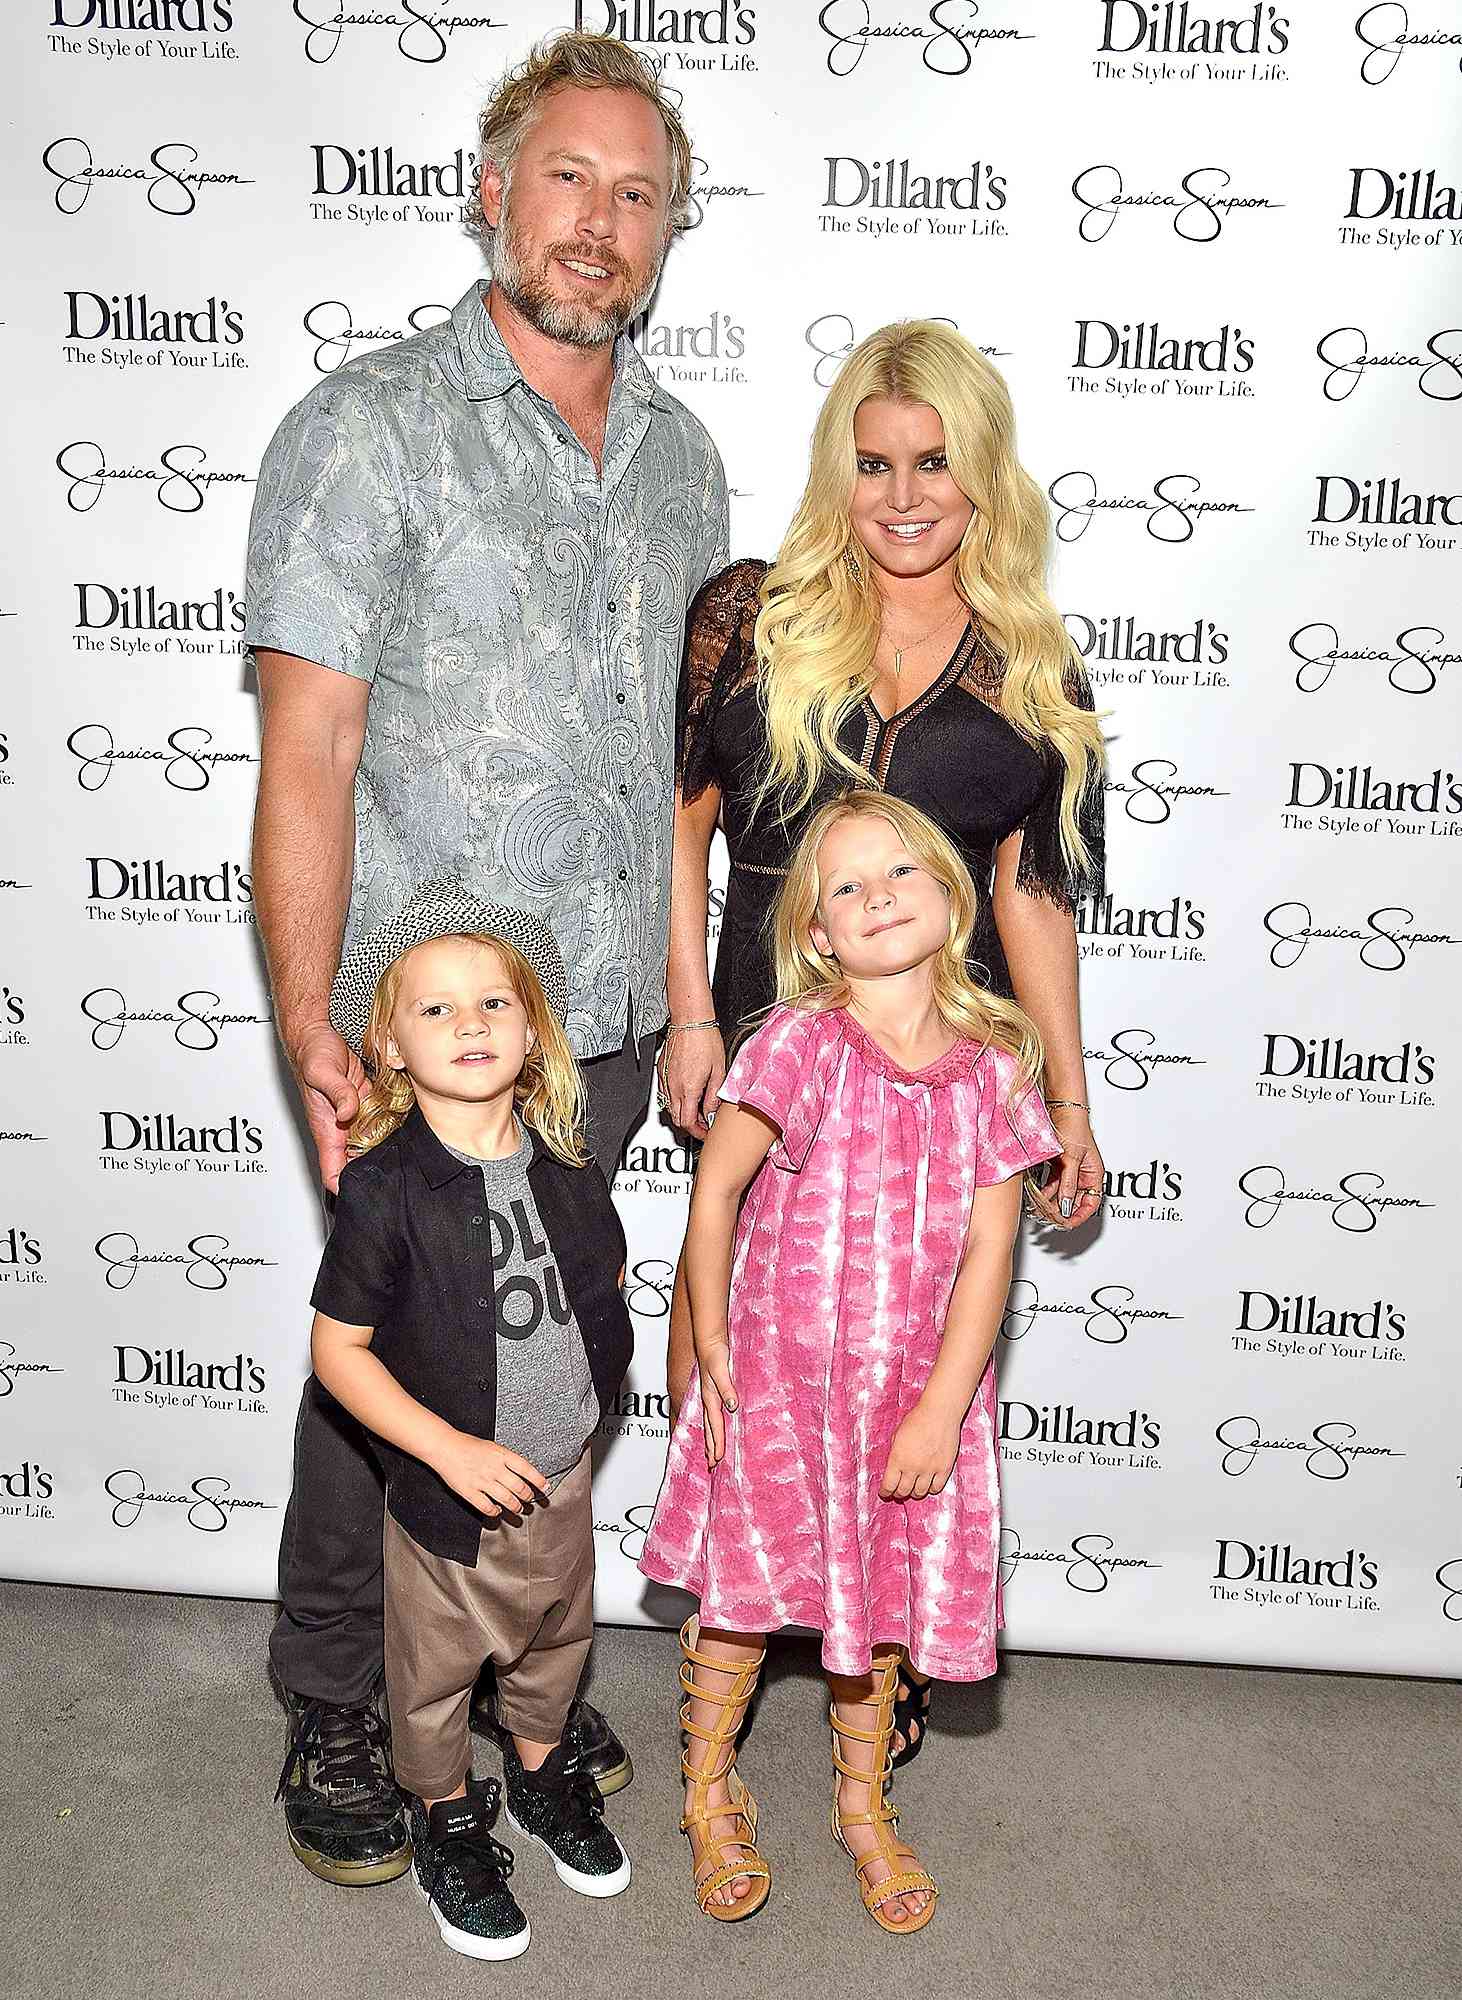 Jessica Simpson Hosts A Spring Style Event At Dillard's - Benefitting The Boys and Girls Clubs Of Waco, TX